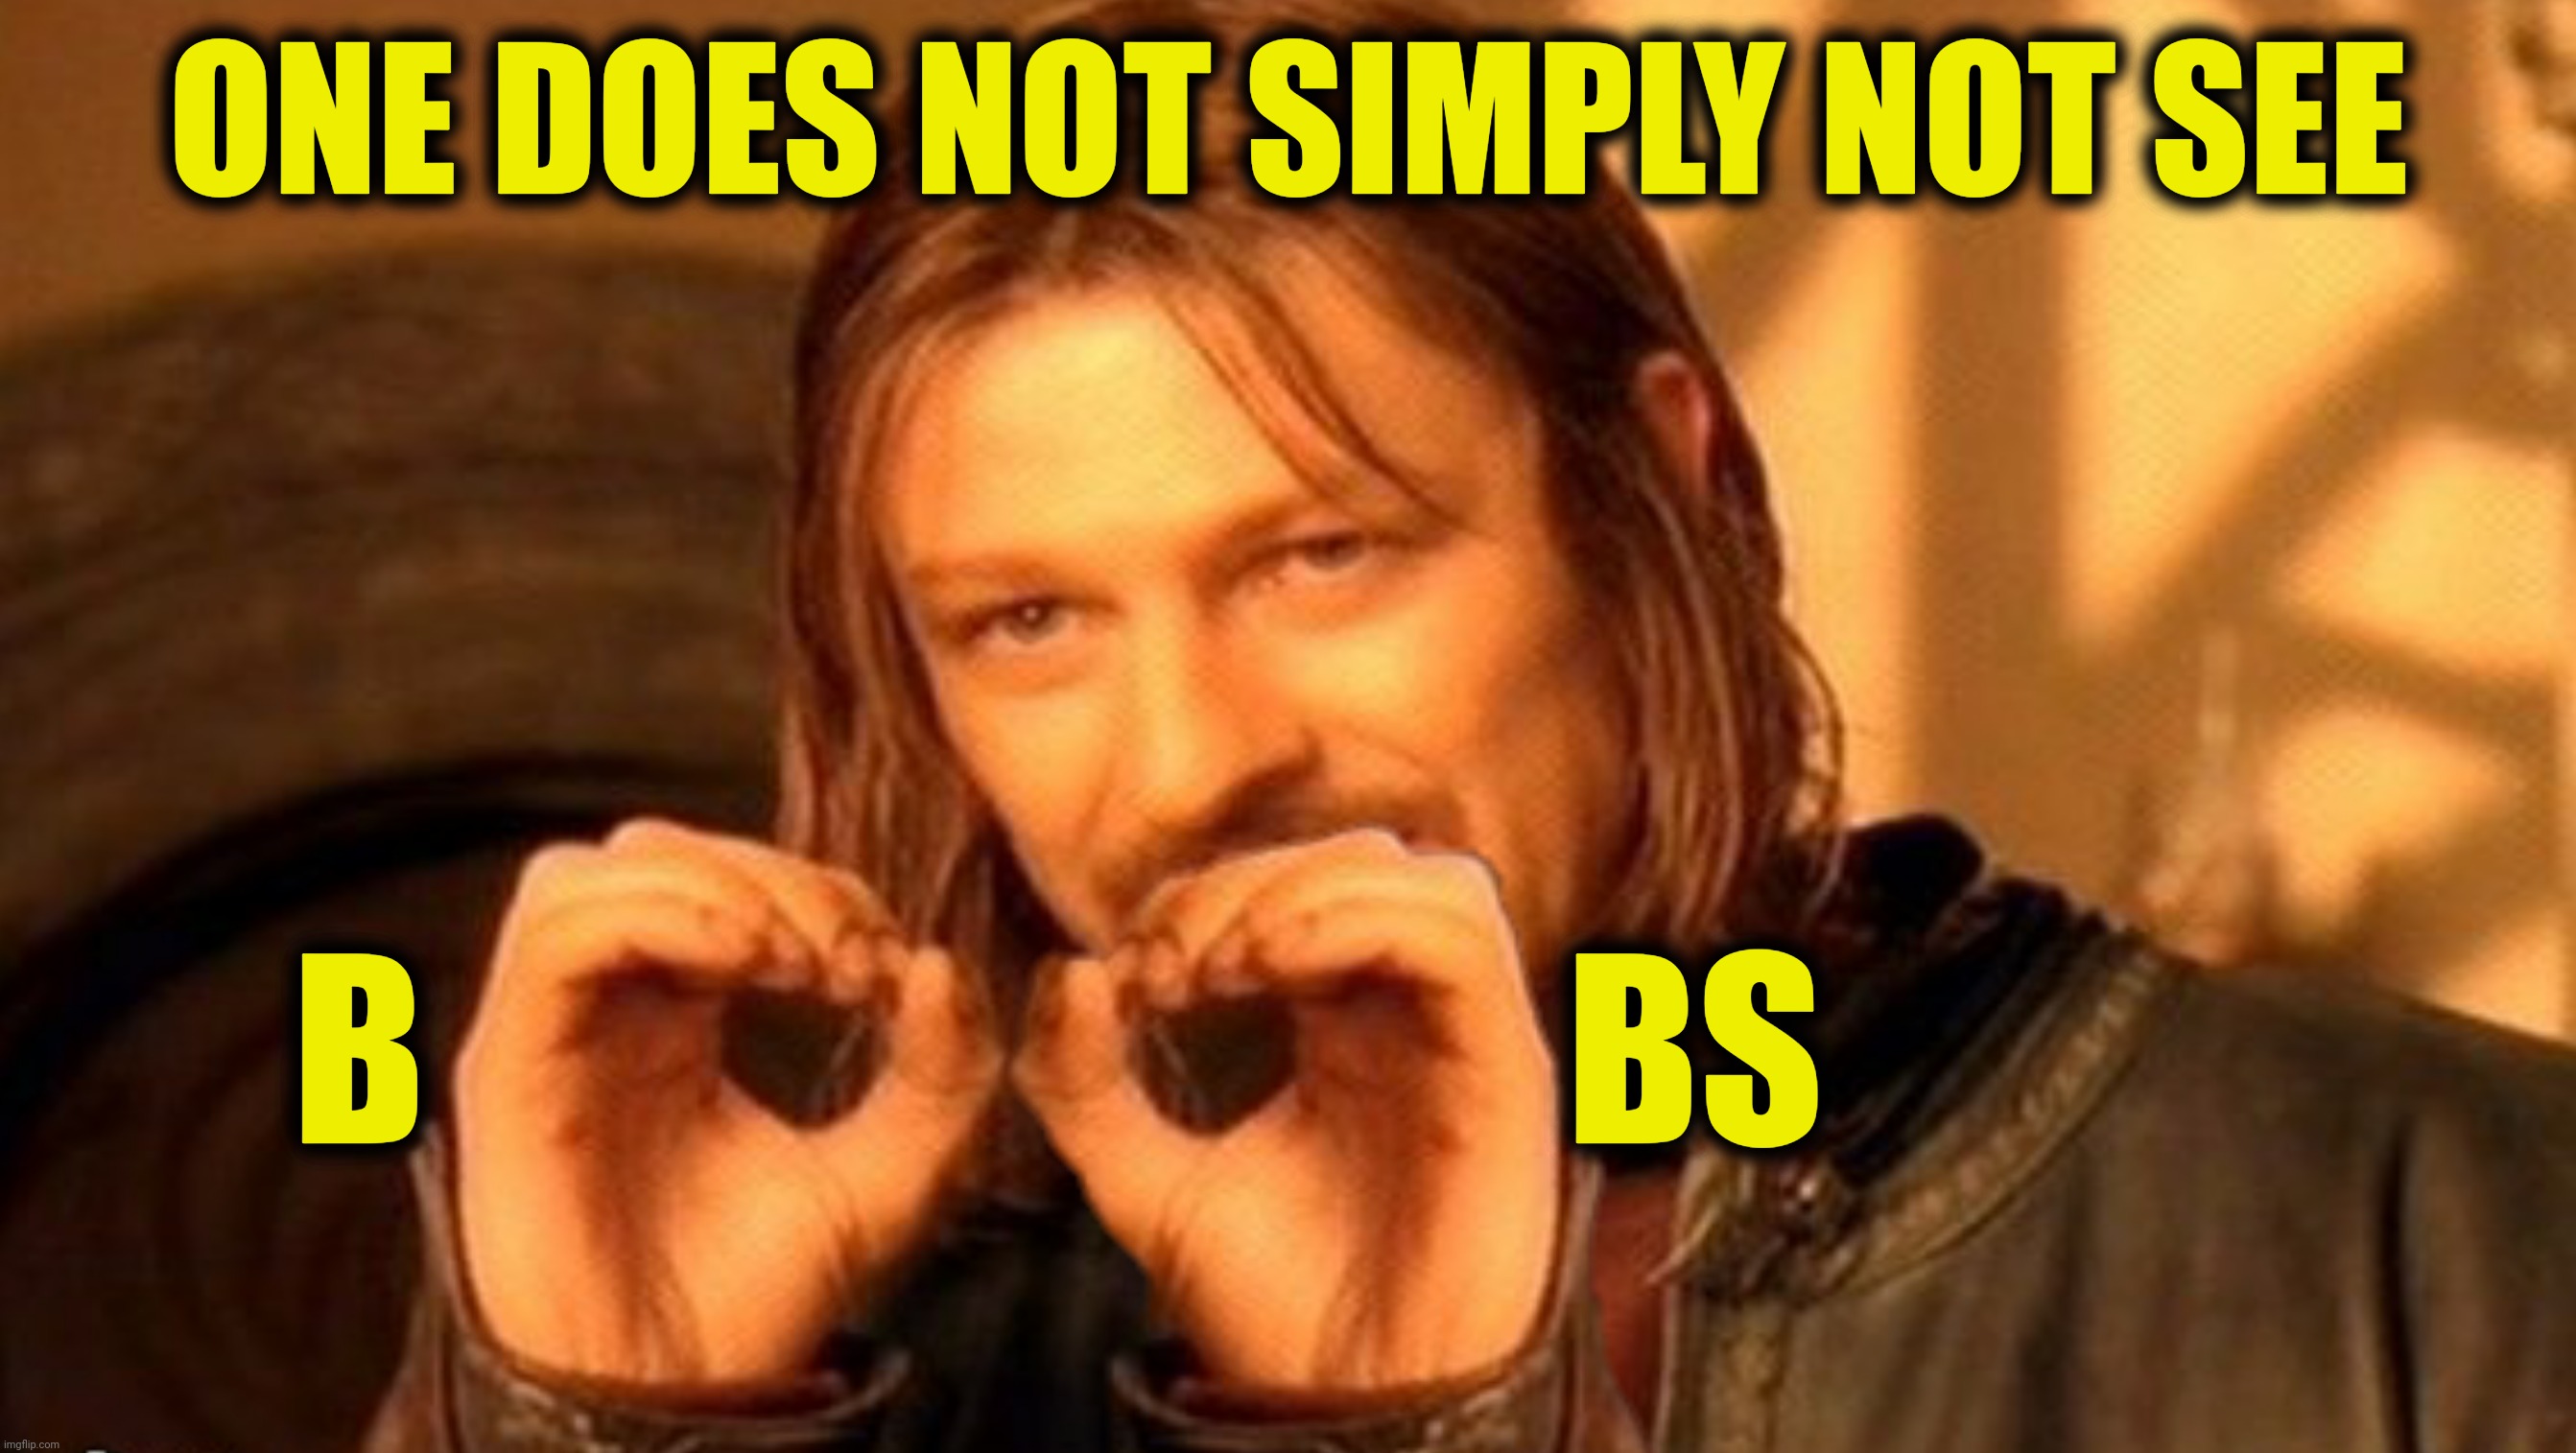 ONE DOES NOT SIMPLY NOT SEE B                           BS | made w/ Imgflip meme maker